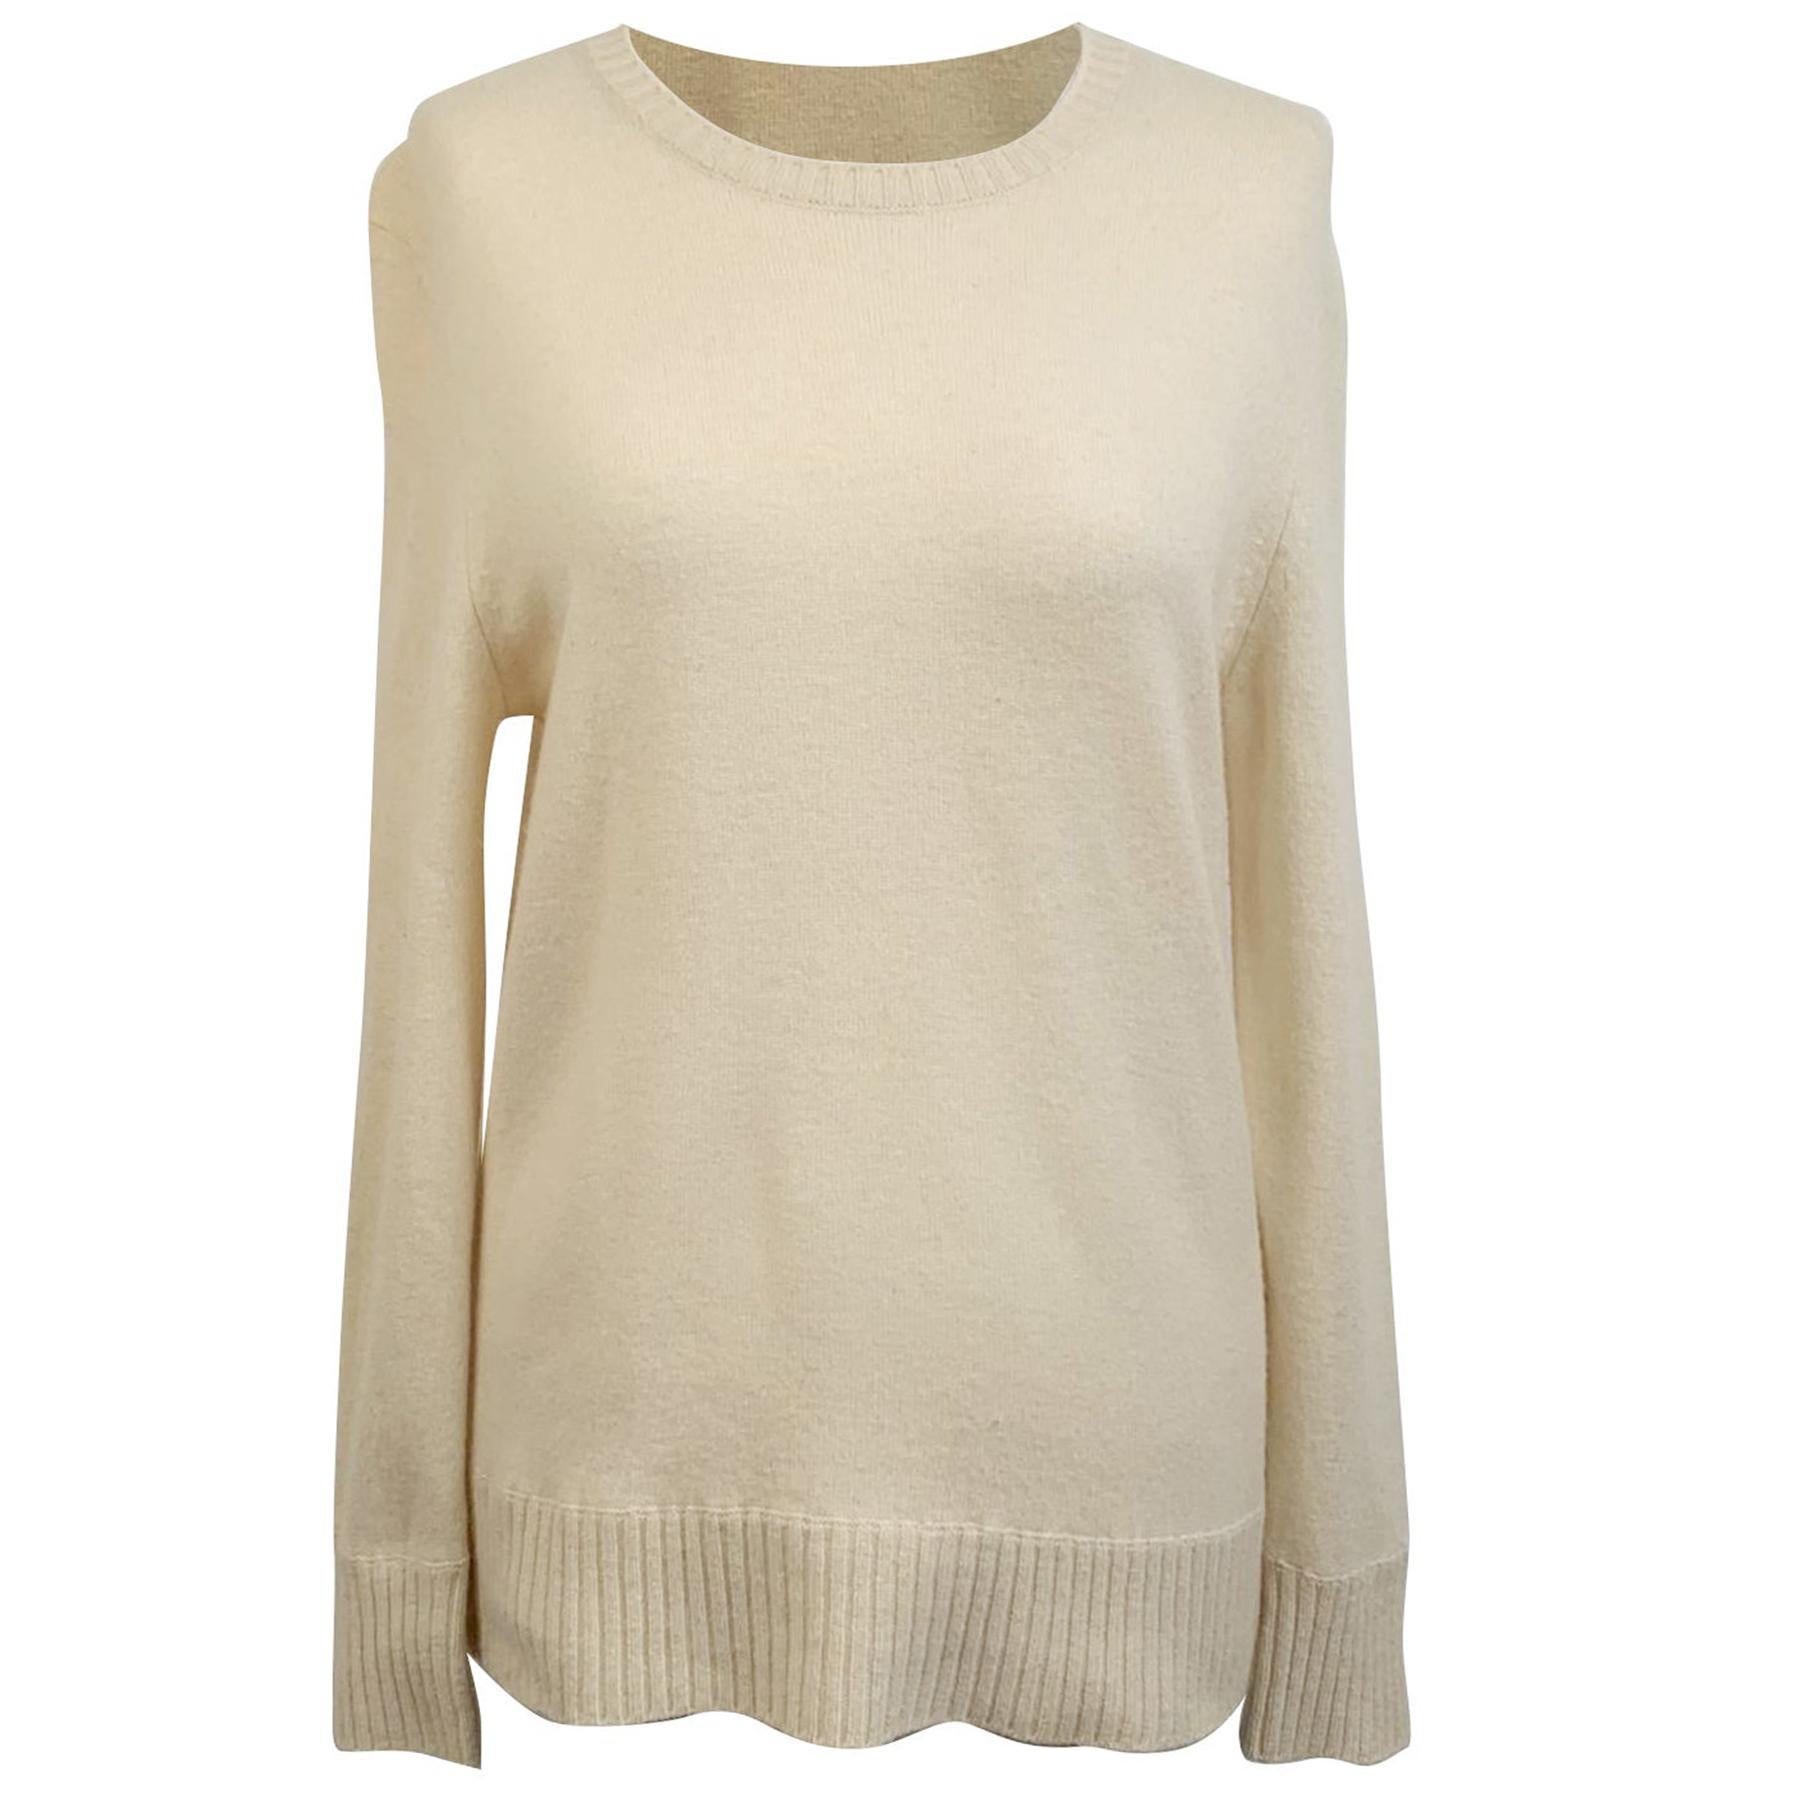 Laura Biagiotti Ivory Wool Cashmere Long Sleeve Jumper Sweater Size 40